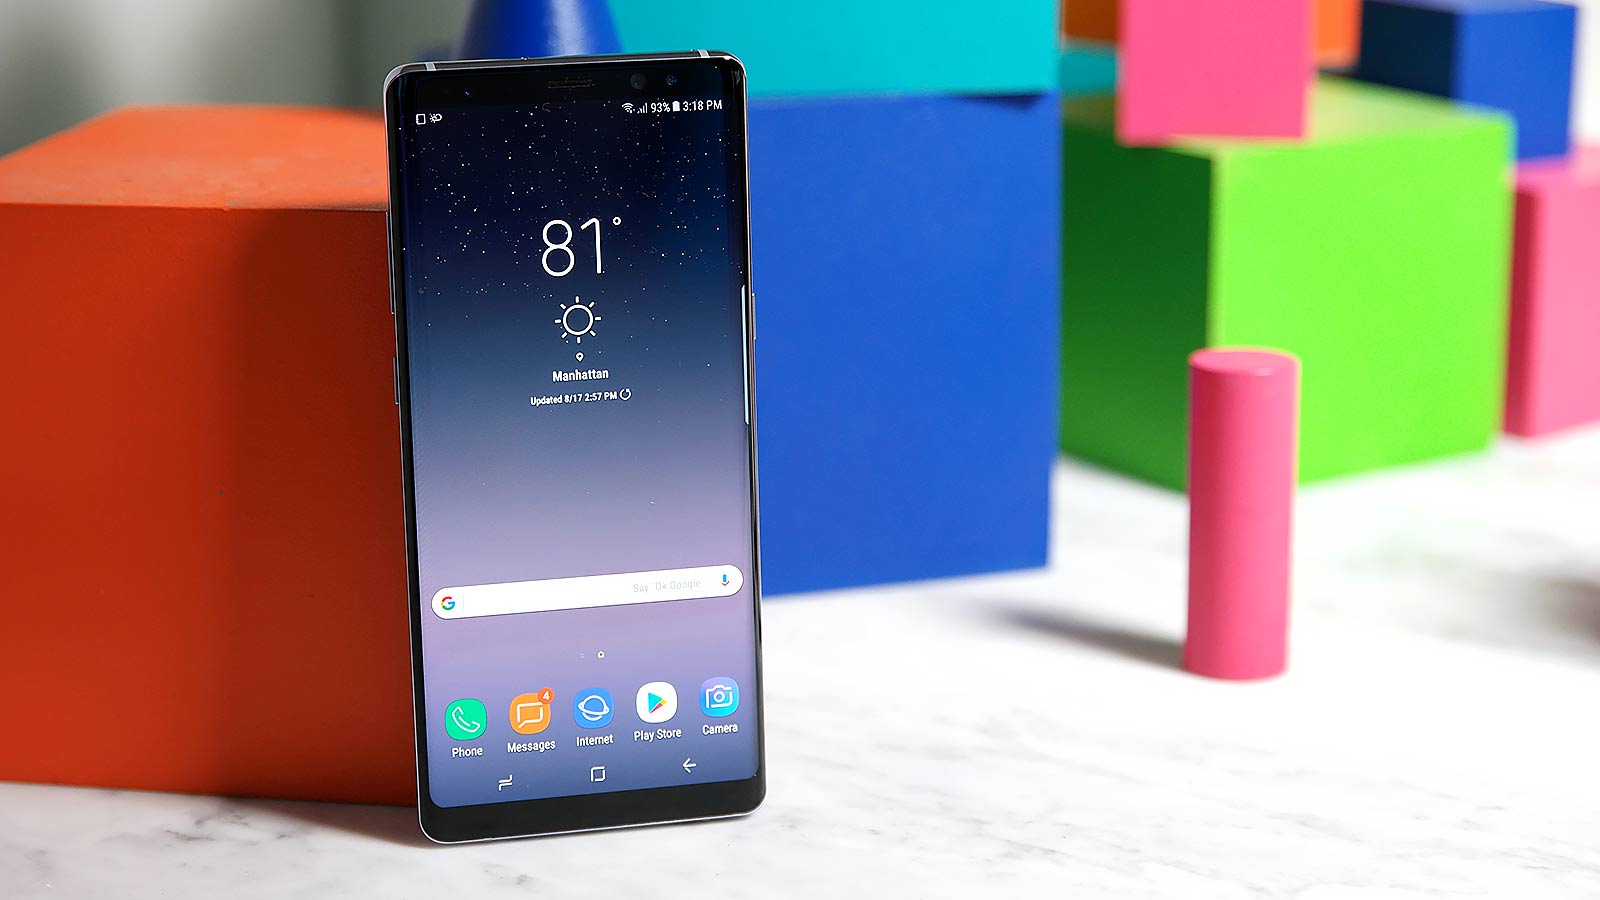 The Best Smartphone For Everyone